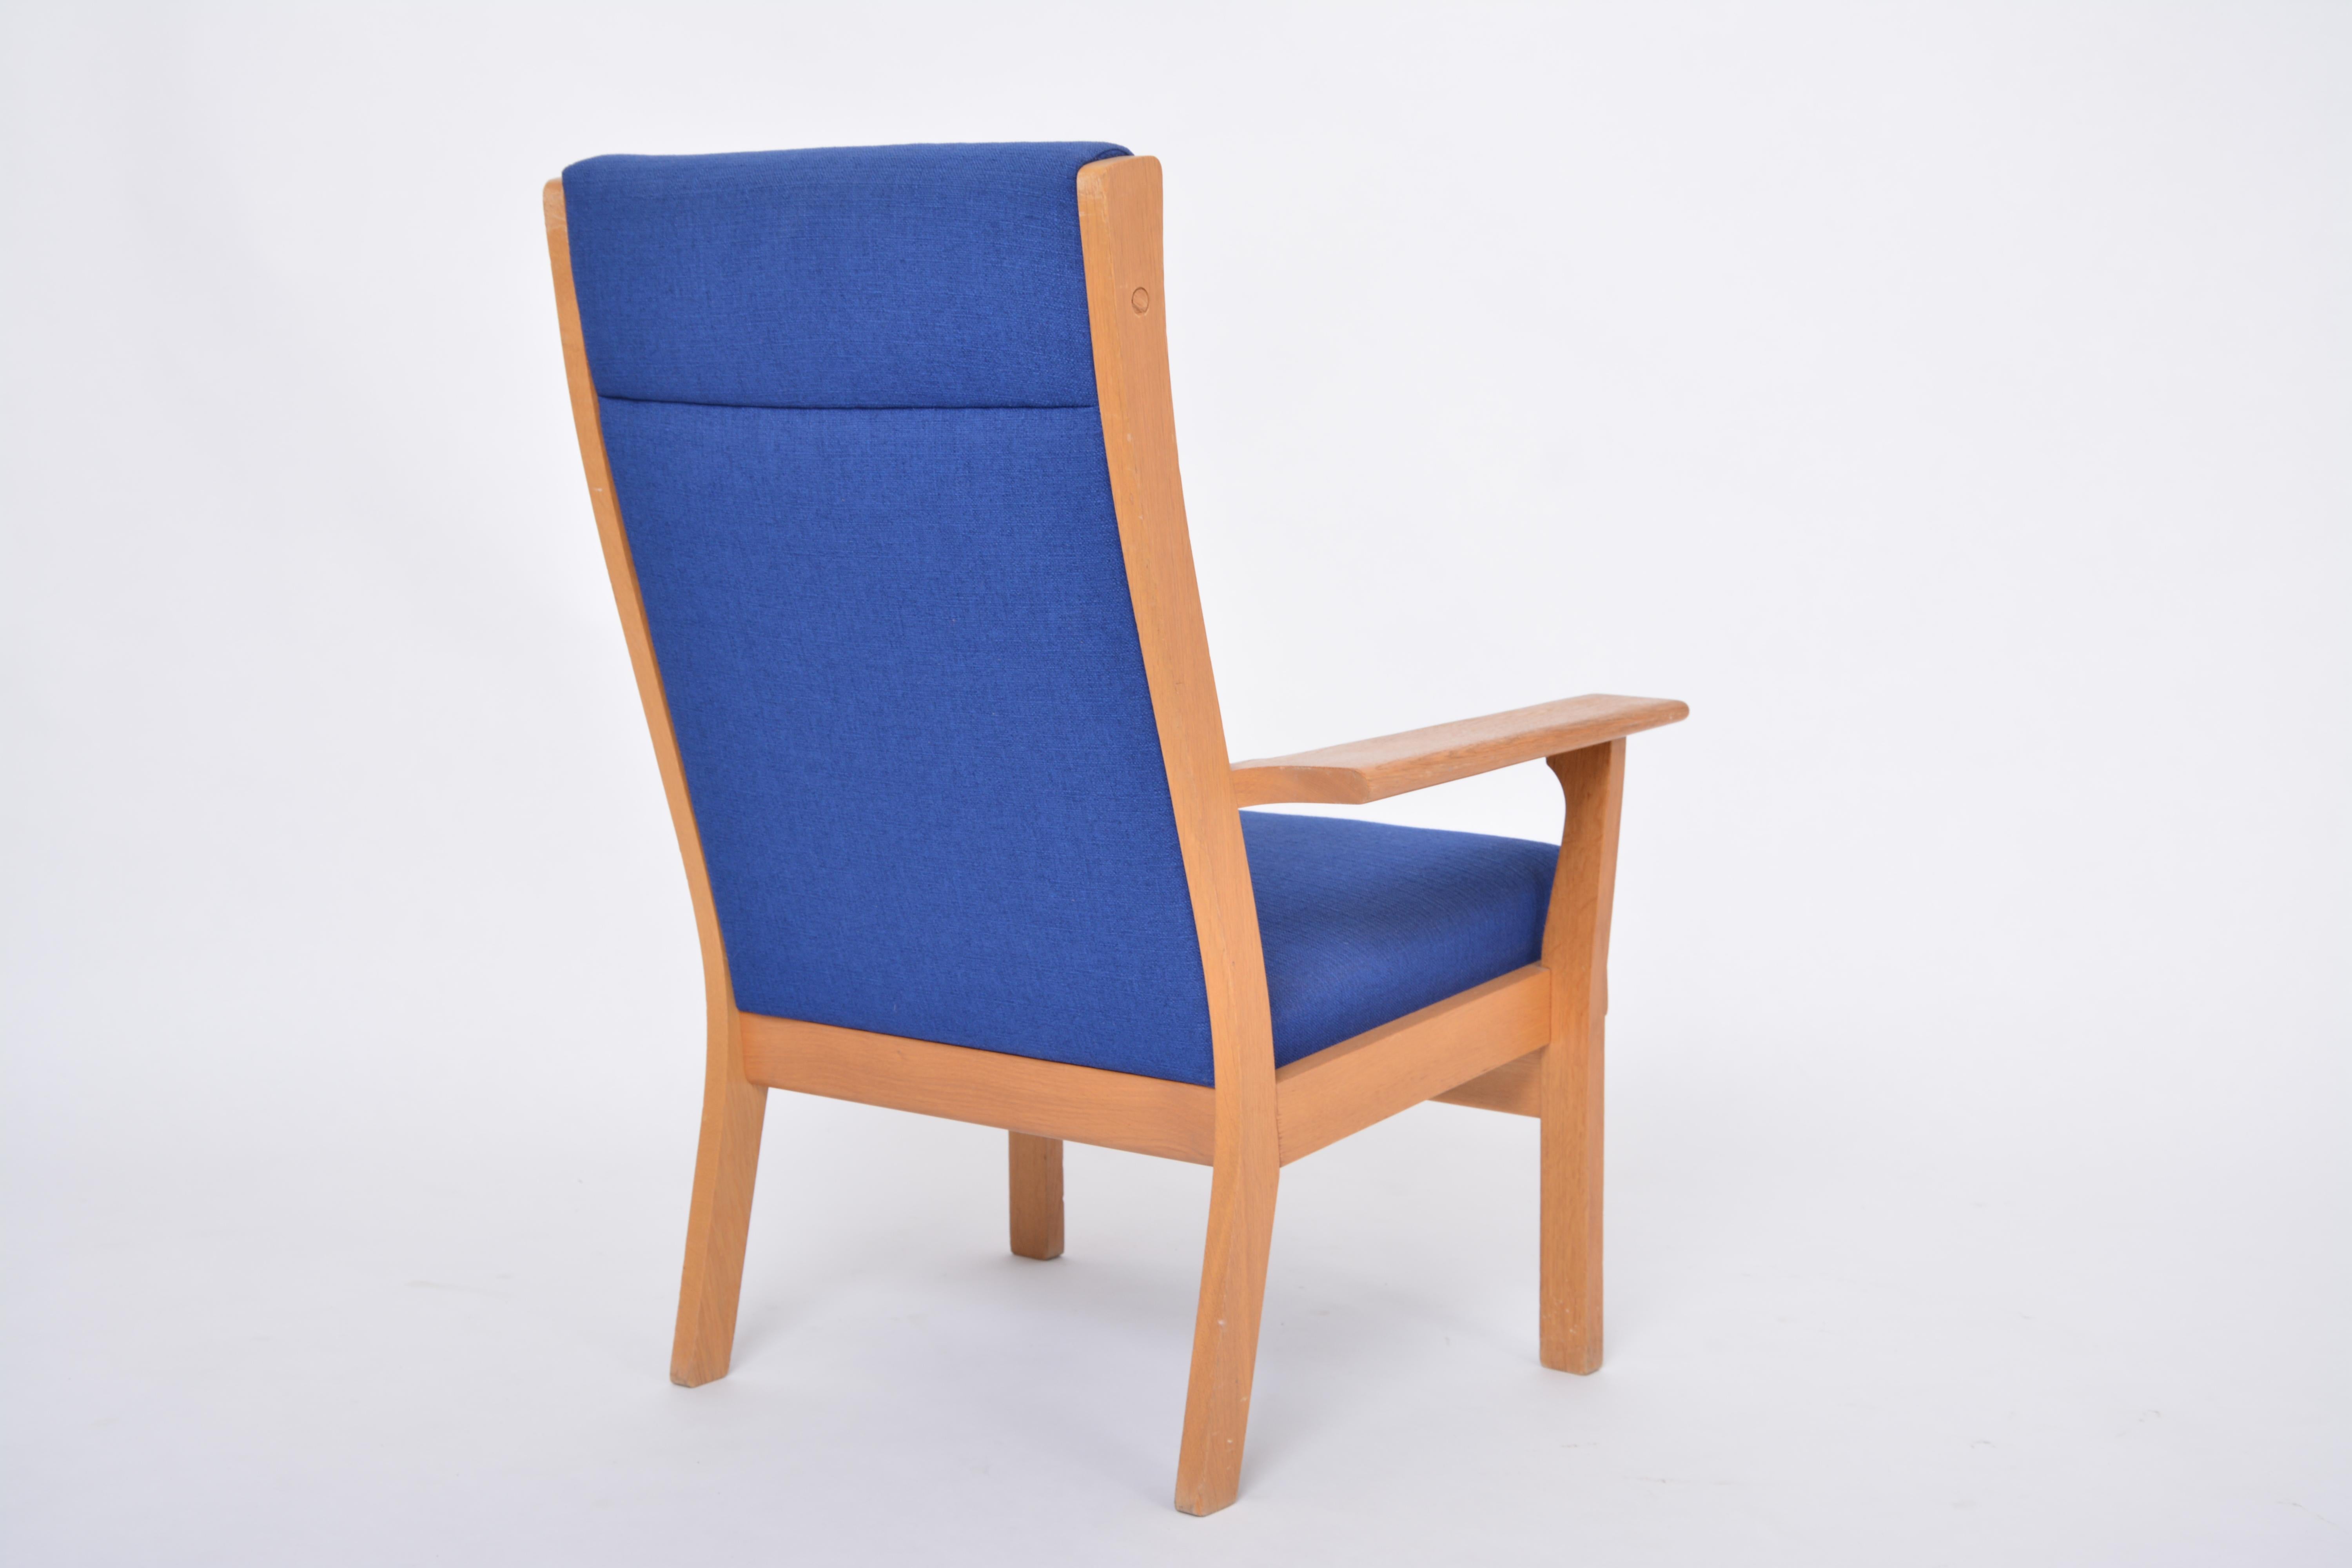 Reupholstered Danish Mid-Century Modern GE 181 a Chair by Hans Wegner for GETAMA For Sale 3